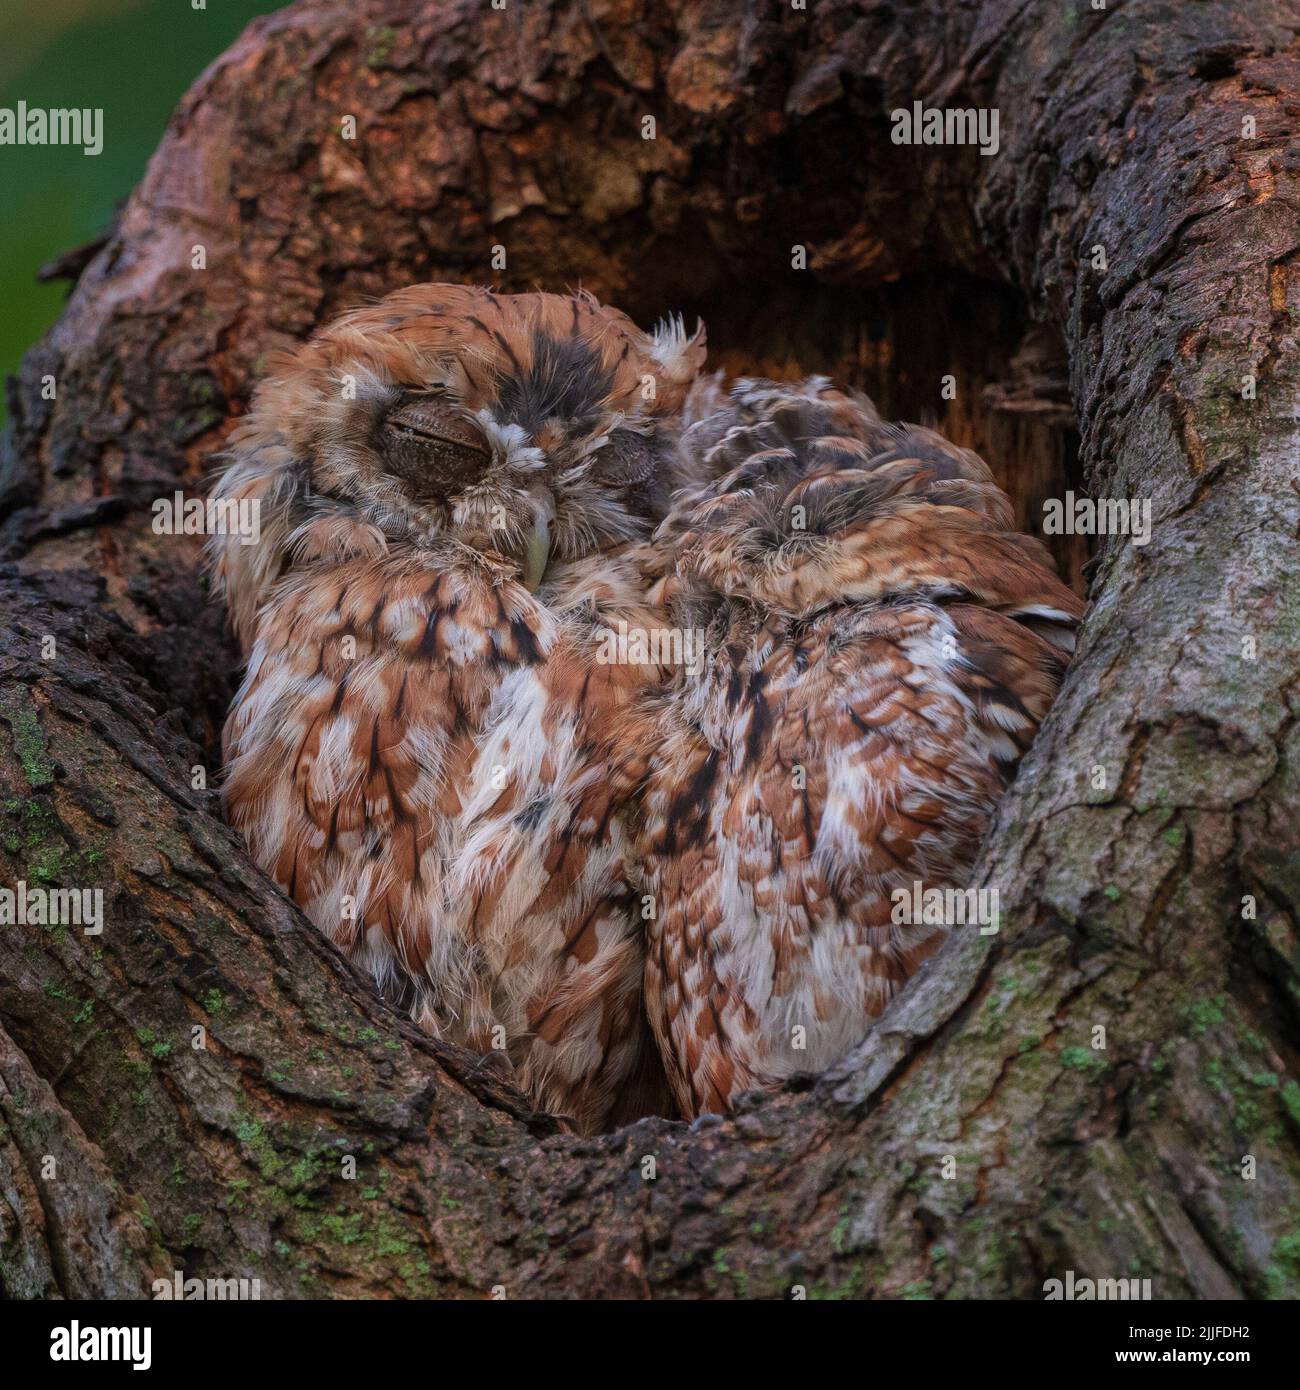 They snuggle together to show their love. Massachusetts, US: THESE ADORABLE pictures show two little owls cuddled up together inside a tree. One image Stock Photo